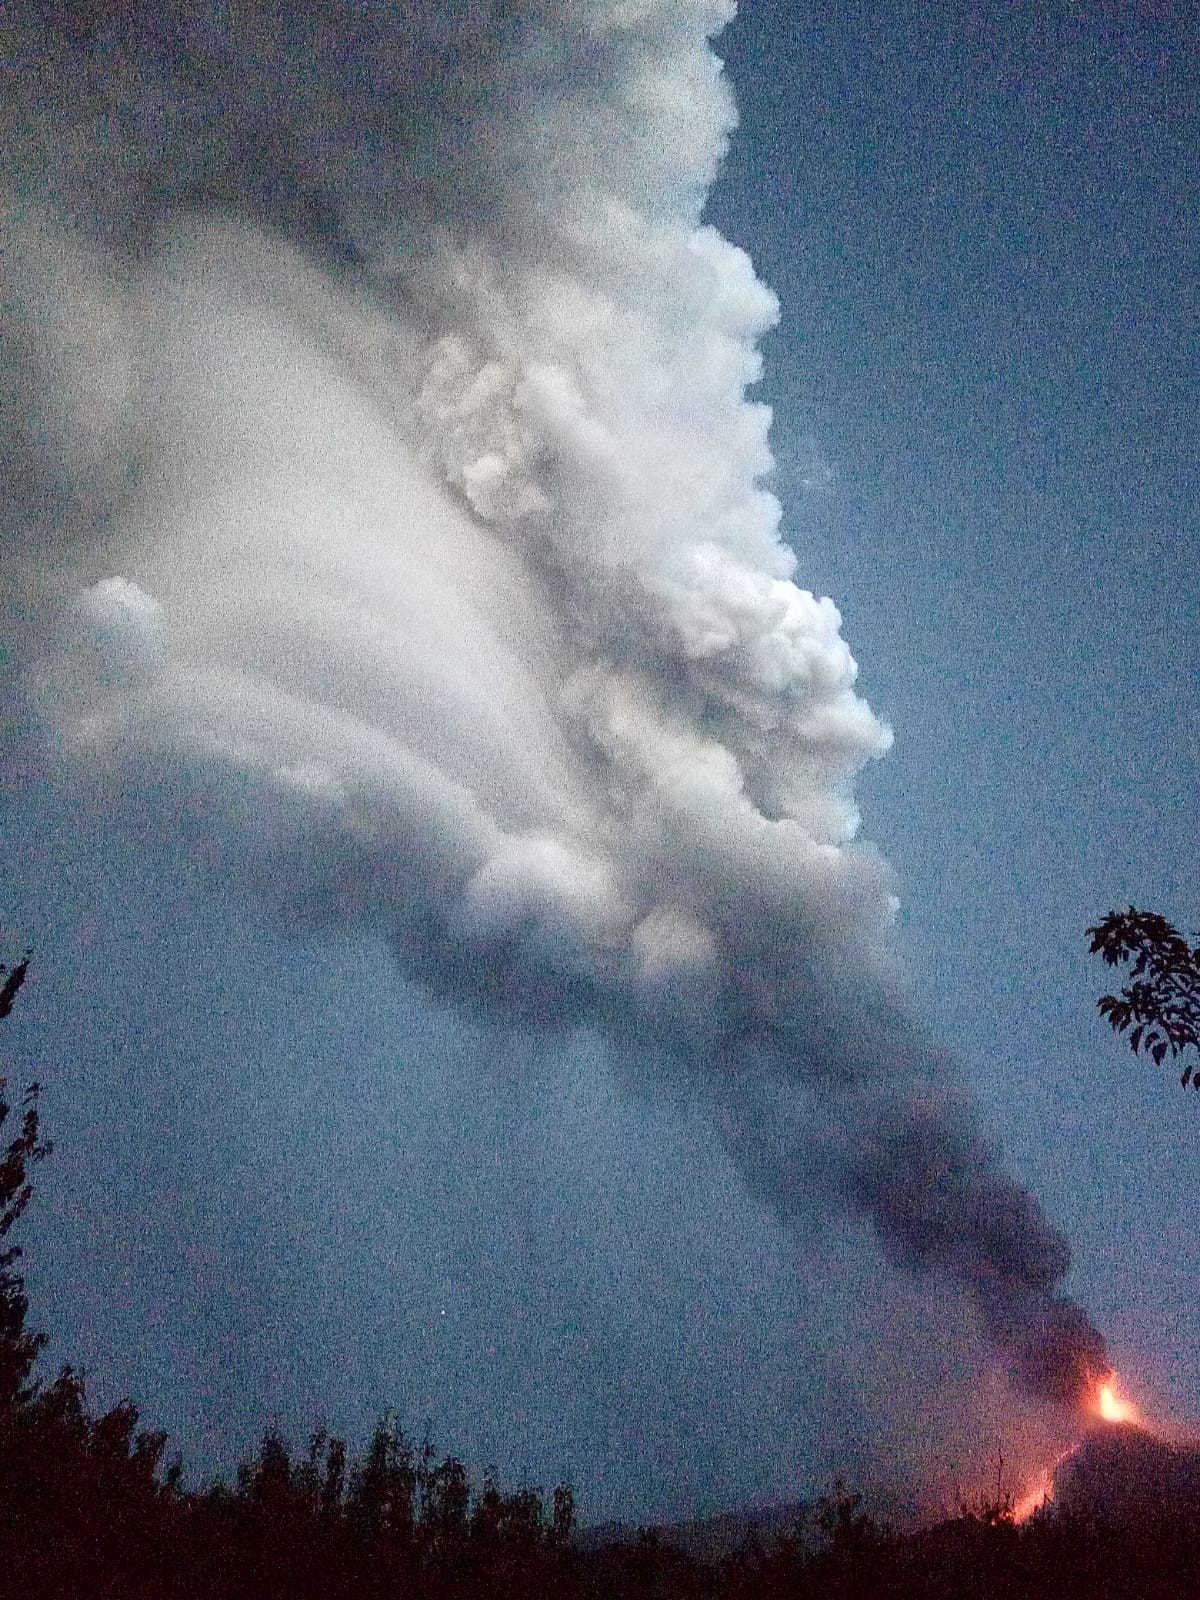 Lava fountain at Etna this morning (image: Franca Fulle)